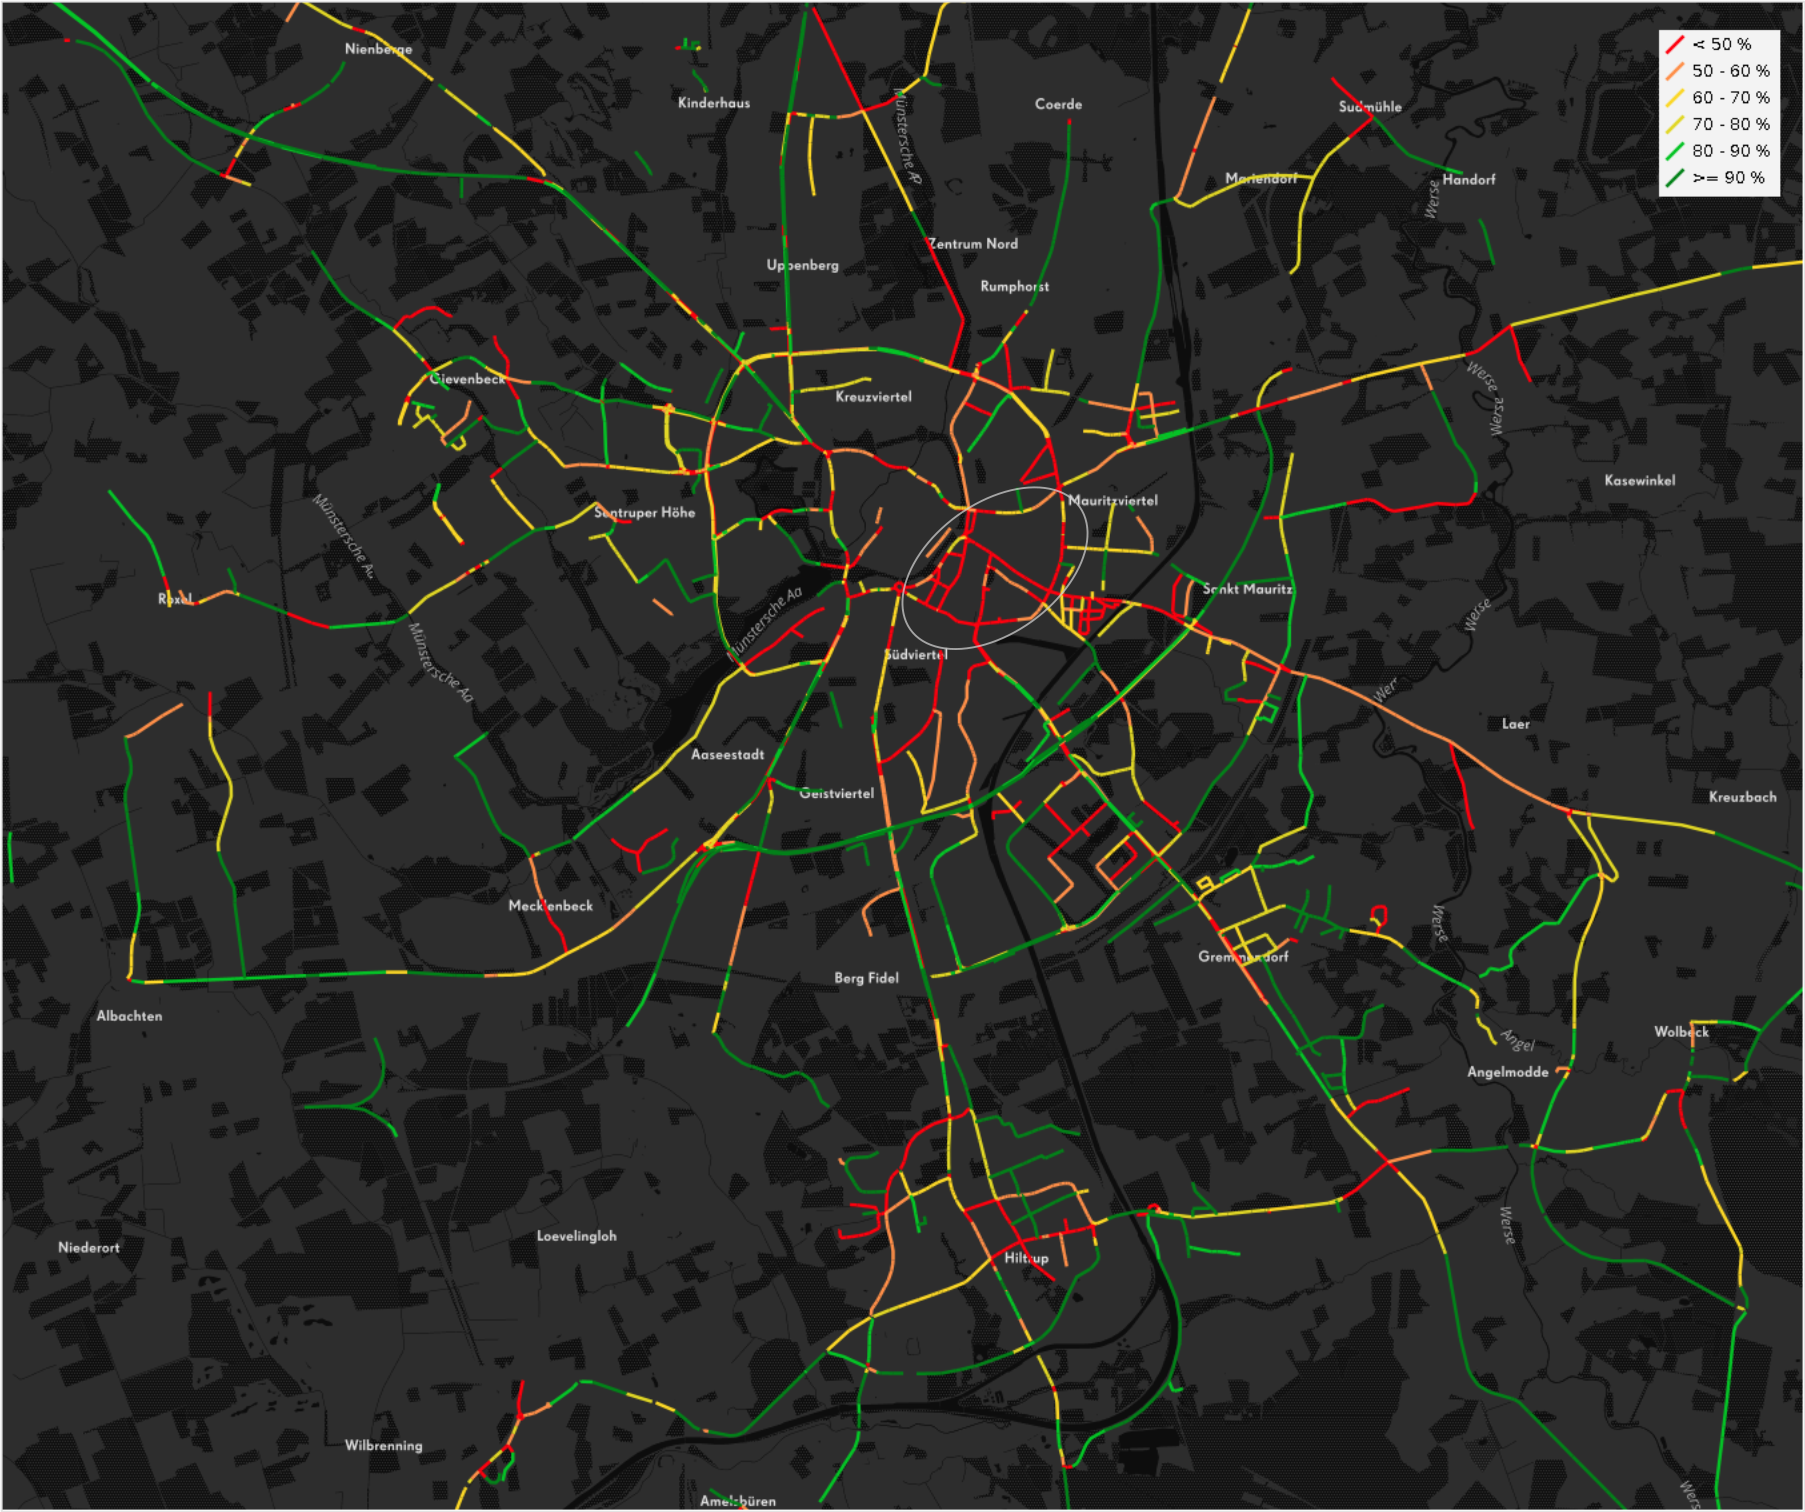 Relative average achieved driving speed per OSM segment in the city of Münster based on open data from the enviroCar platform.